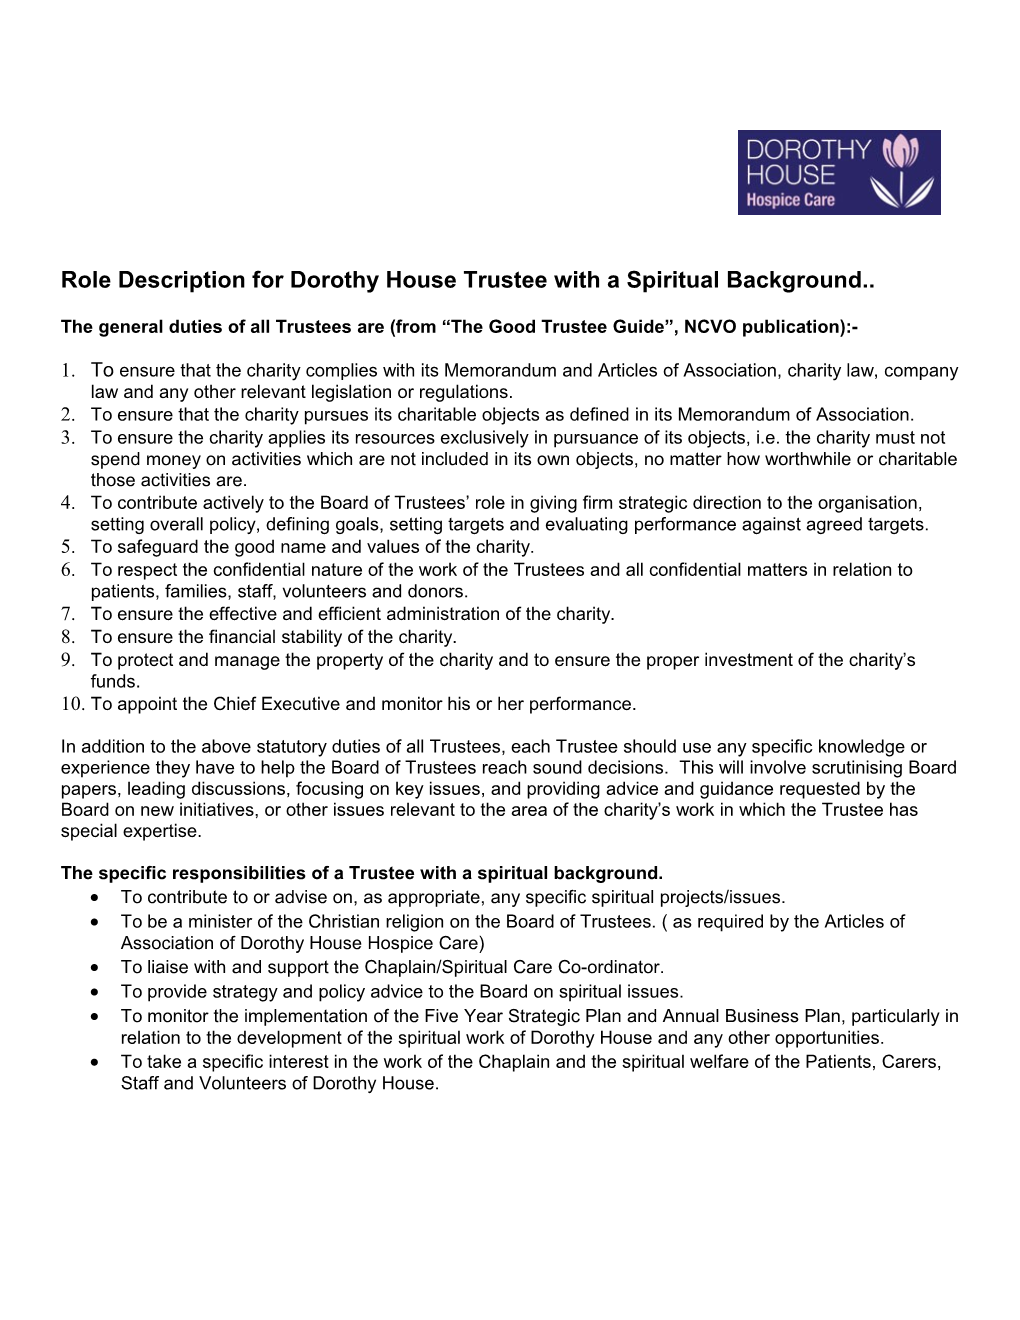 Role Description for Dorothy House Trustee with a Spiritual Background